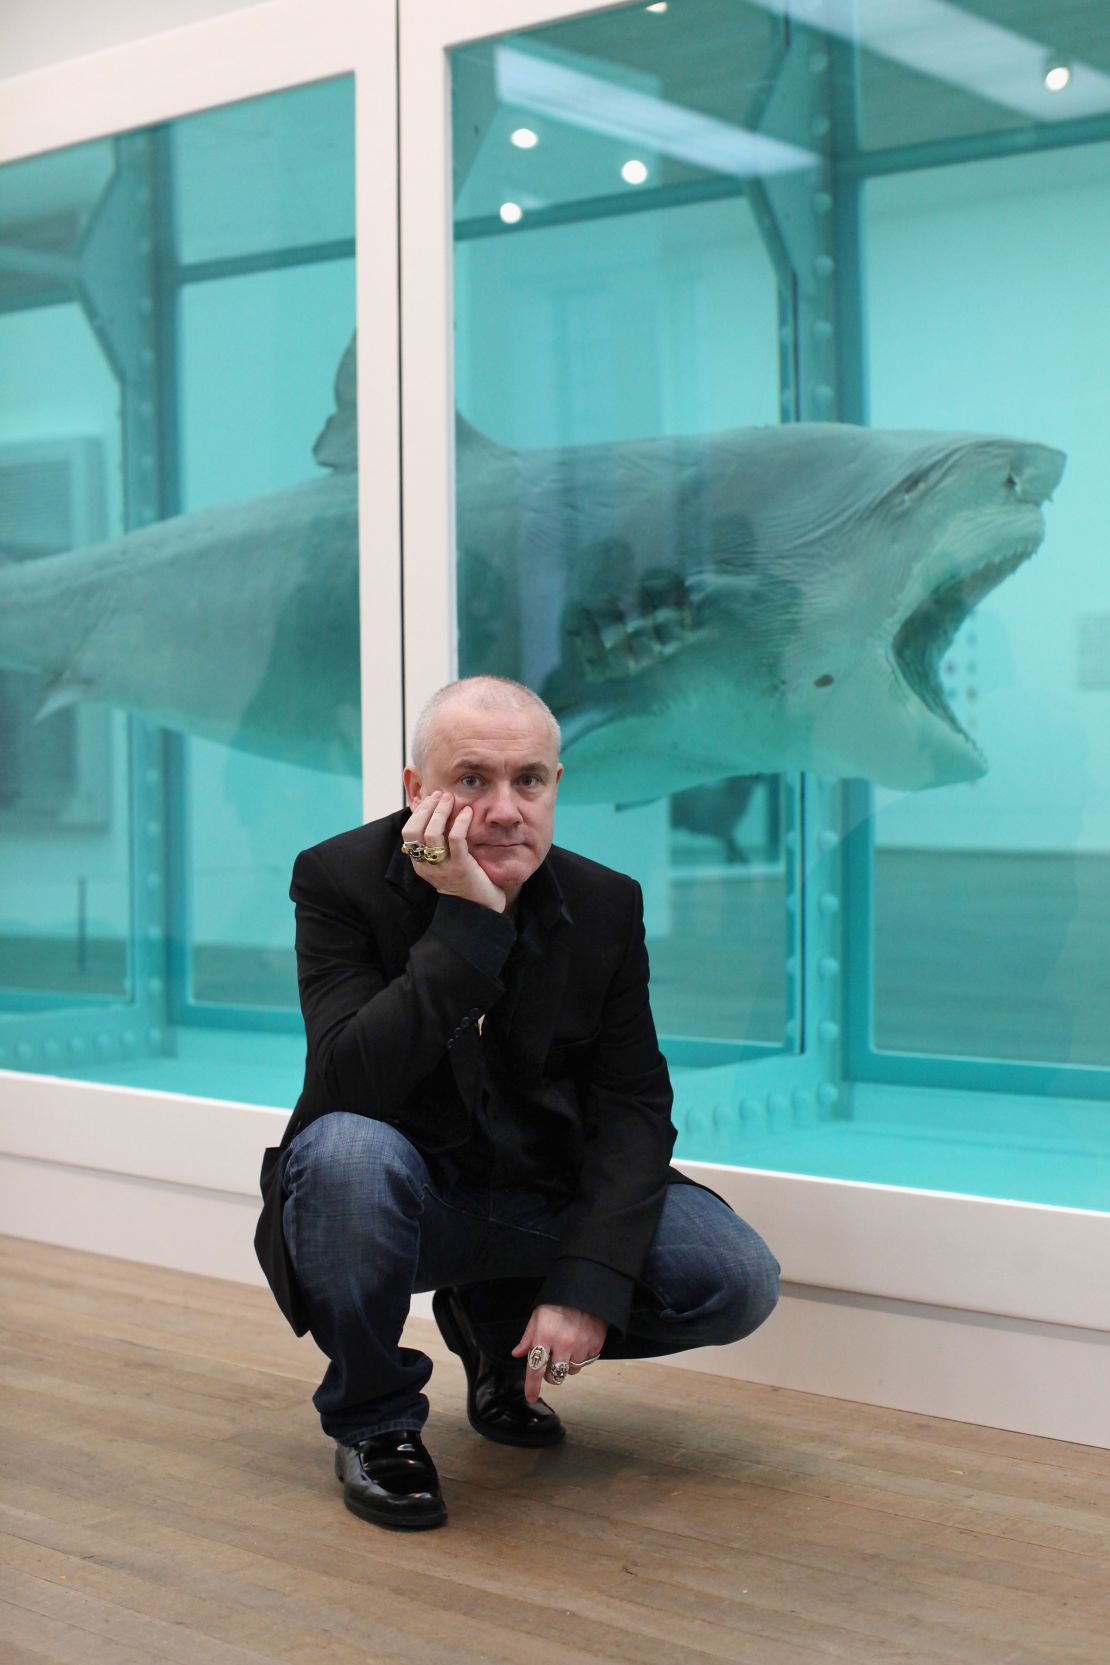 Hirst poses in front of "The Physical Impossibility of Death in the Mind of Someone Living" in London's Tate Modern art gallery on April 2, 2012.